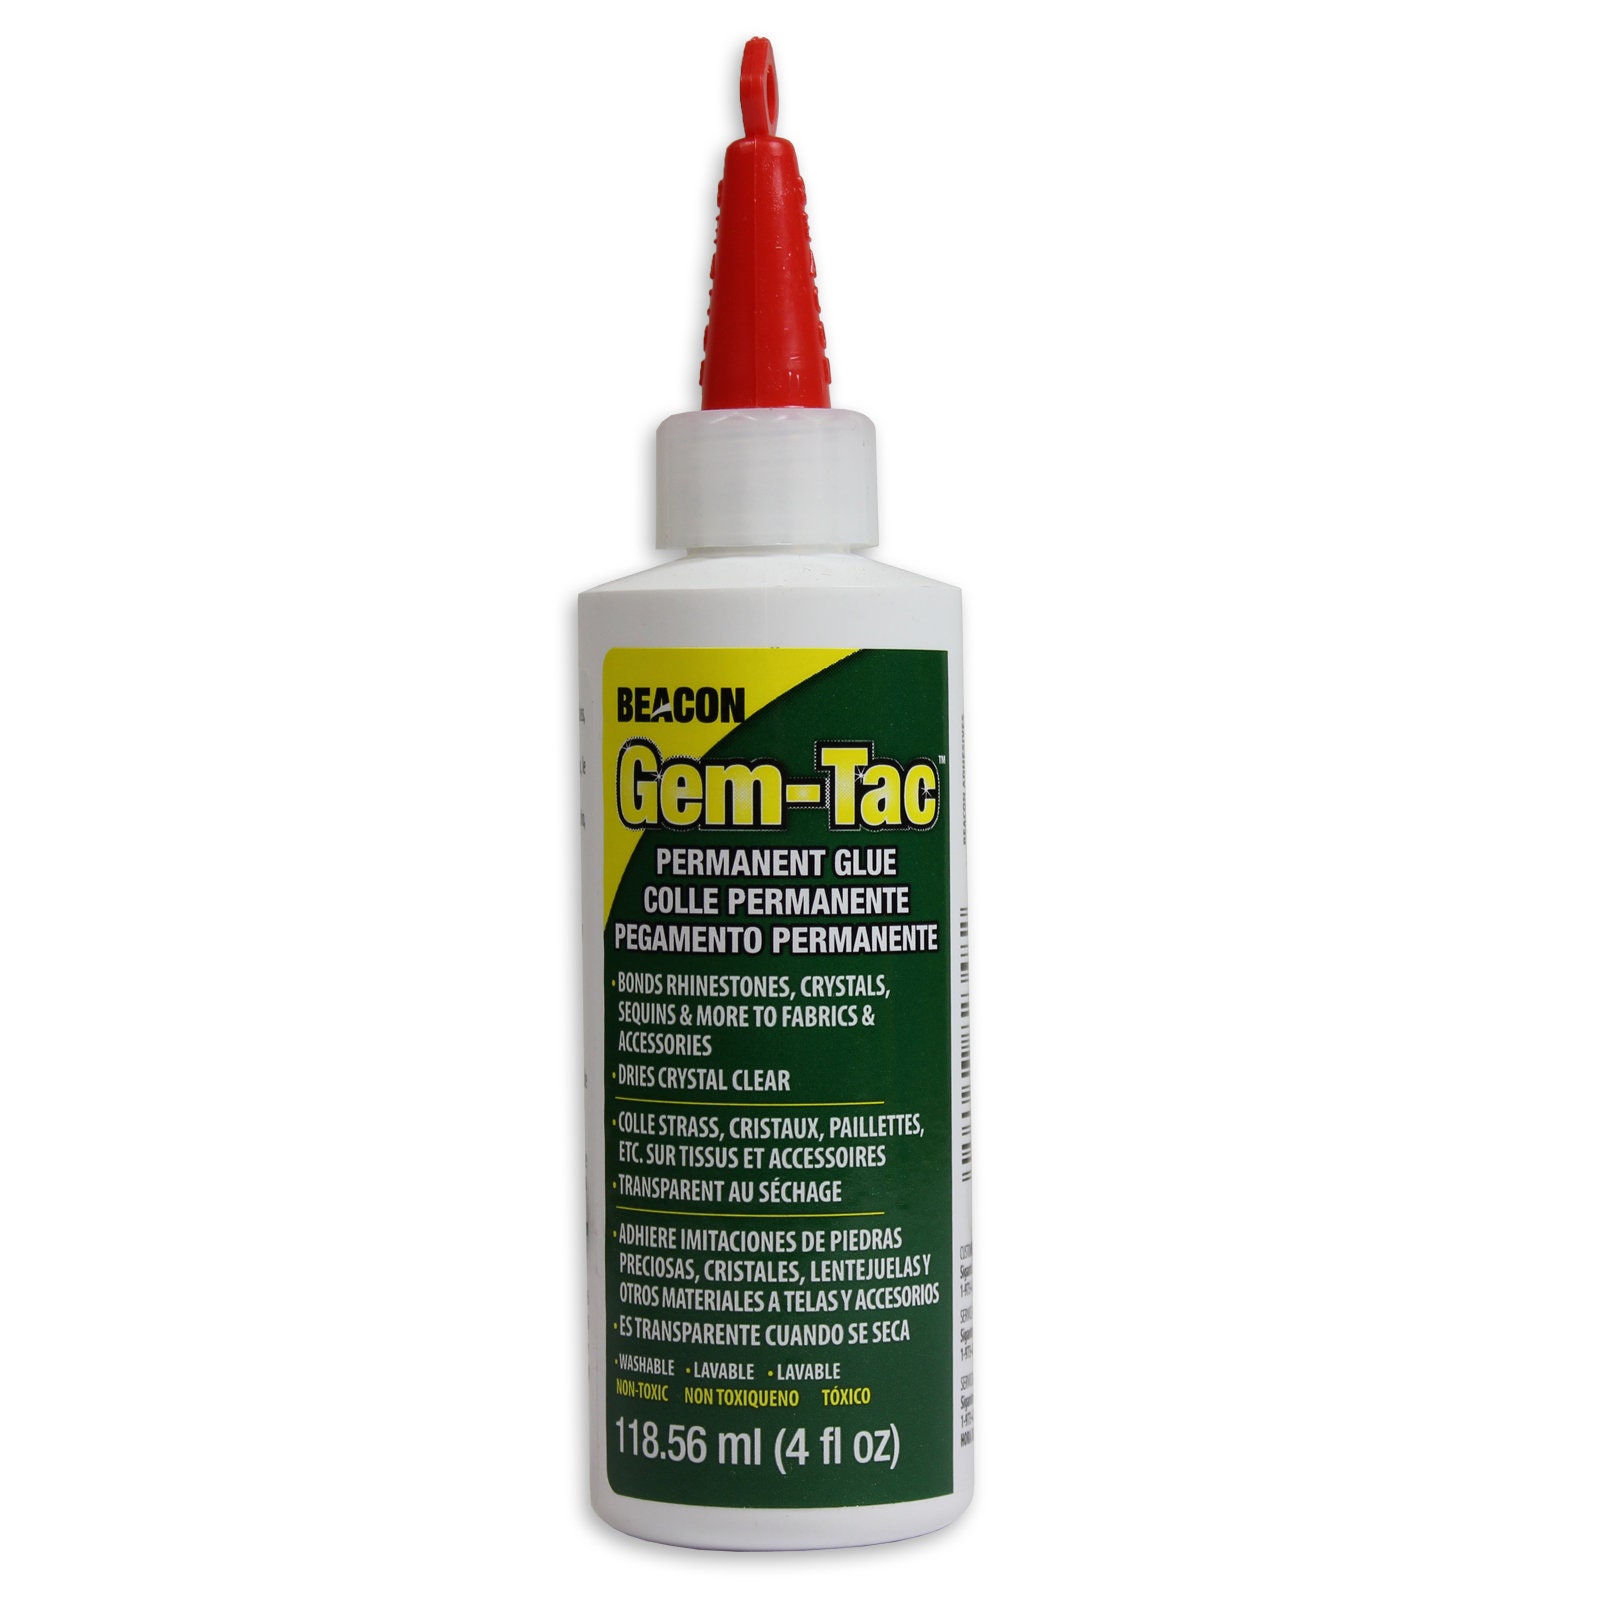 Beacon Gem-tac™ Glue in Needle Precision Tip Bottle for Attaching  Rhinestones, Crystals, Pearls & Other Embellishments to Various Surfaces 